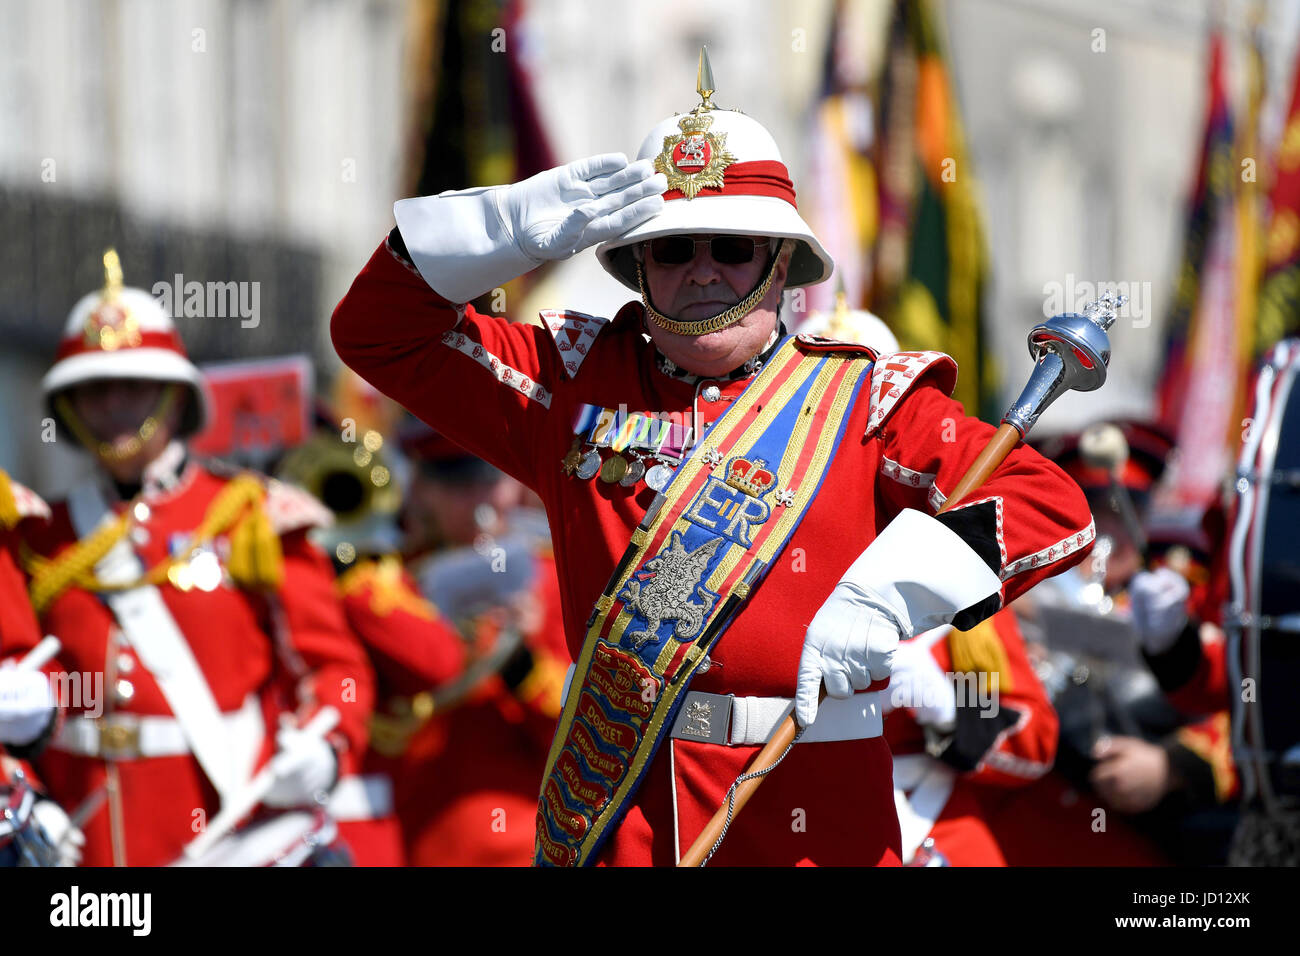 Weymouth, Dorset, UK. 18th June, 2017. Armed Forces Day Parade, Weymouth, Dorset, UK Credit: Finnbarr Webster/Alamy Live News Stock Photo